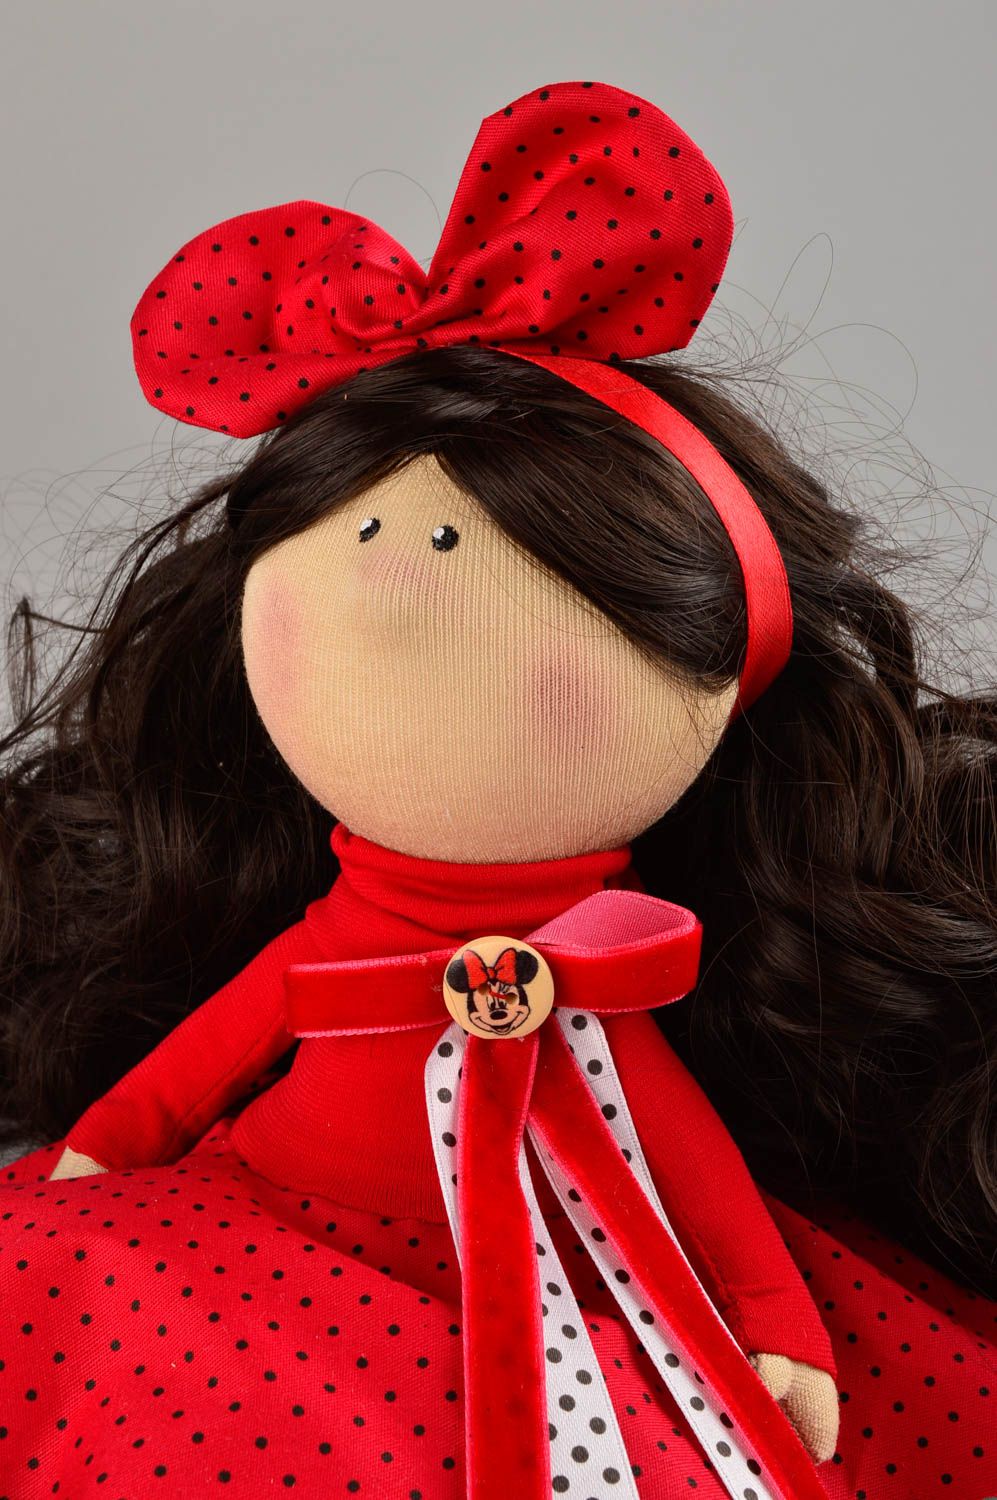 Designer doll bright handmade doll in red dress textile toy decorative use only photo 4